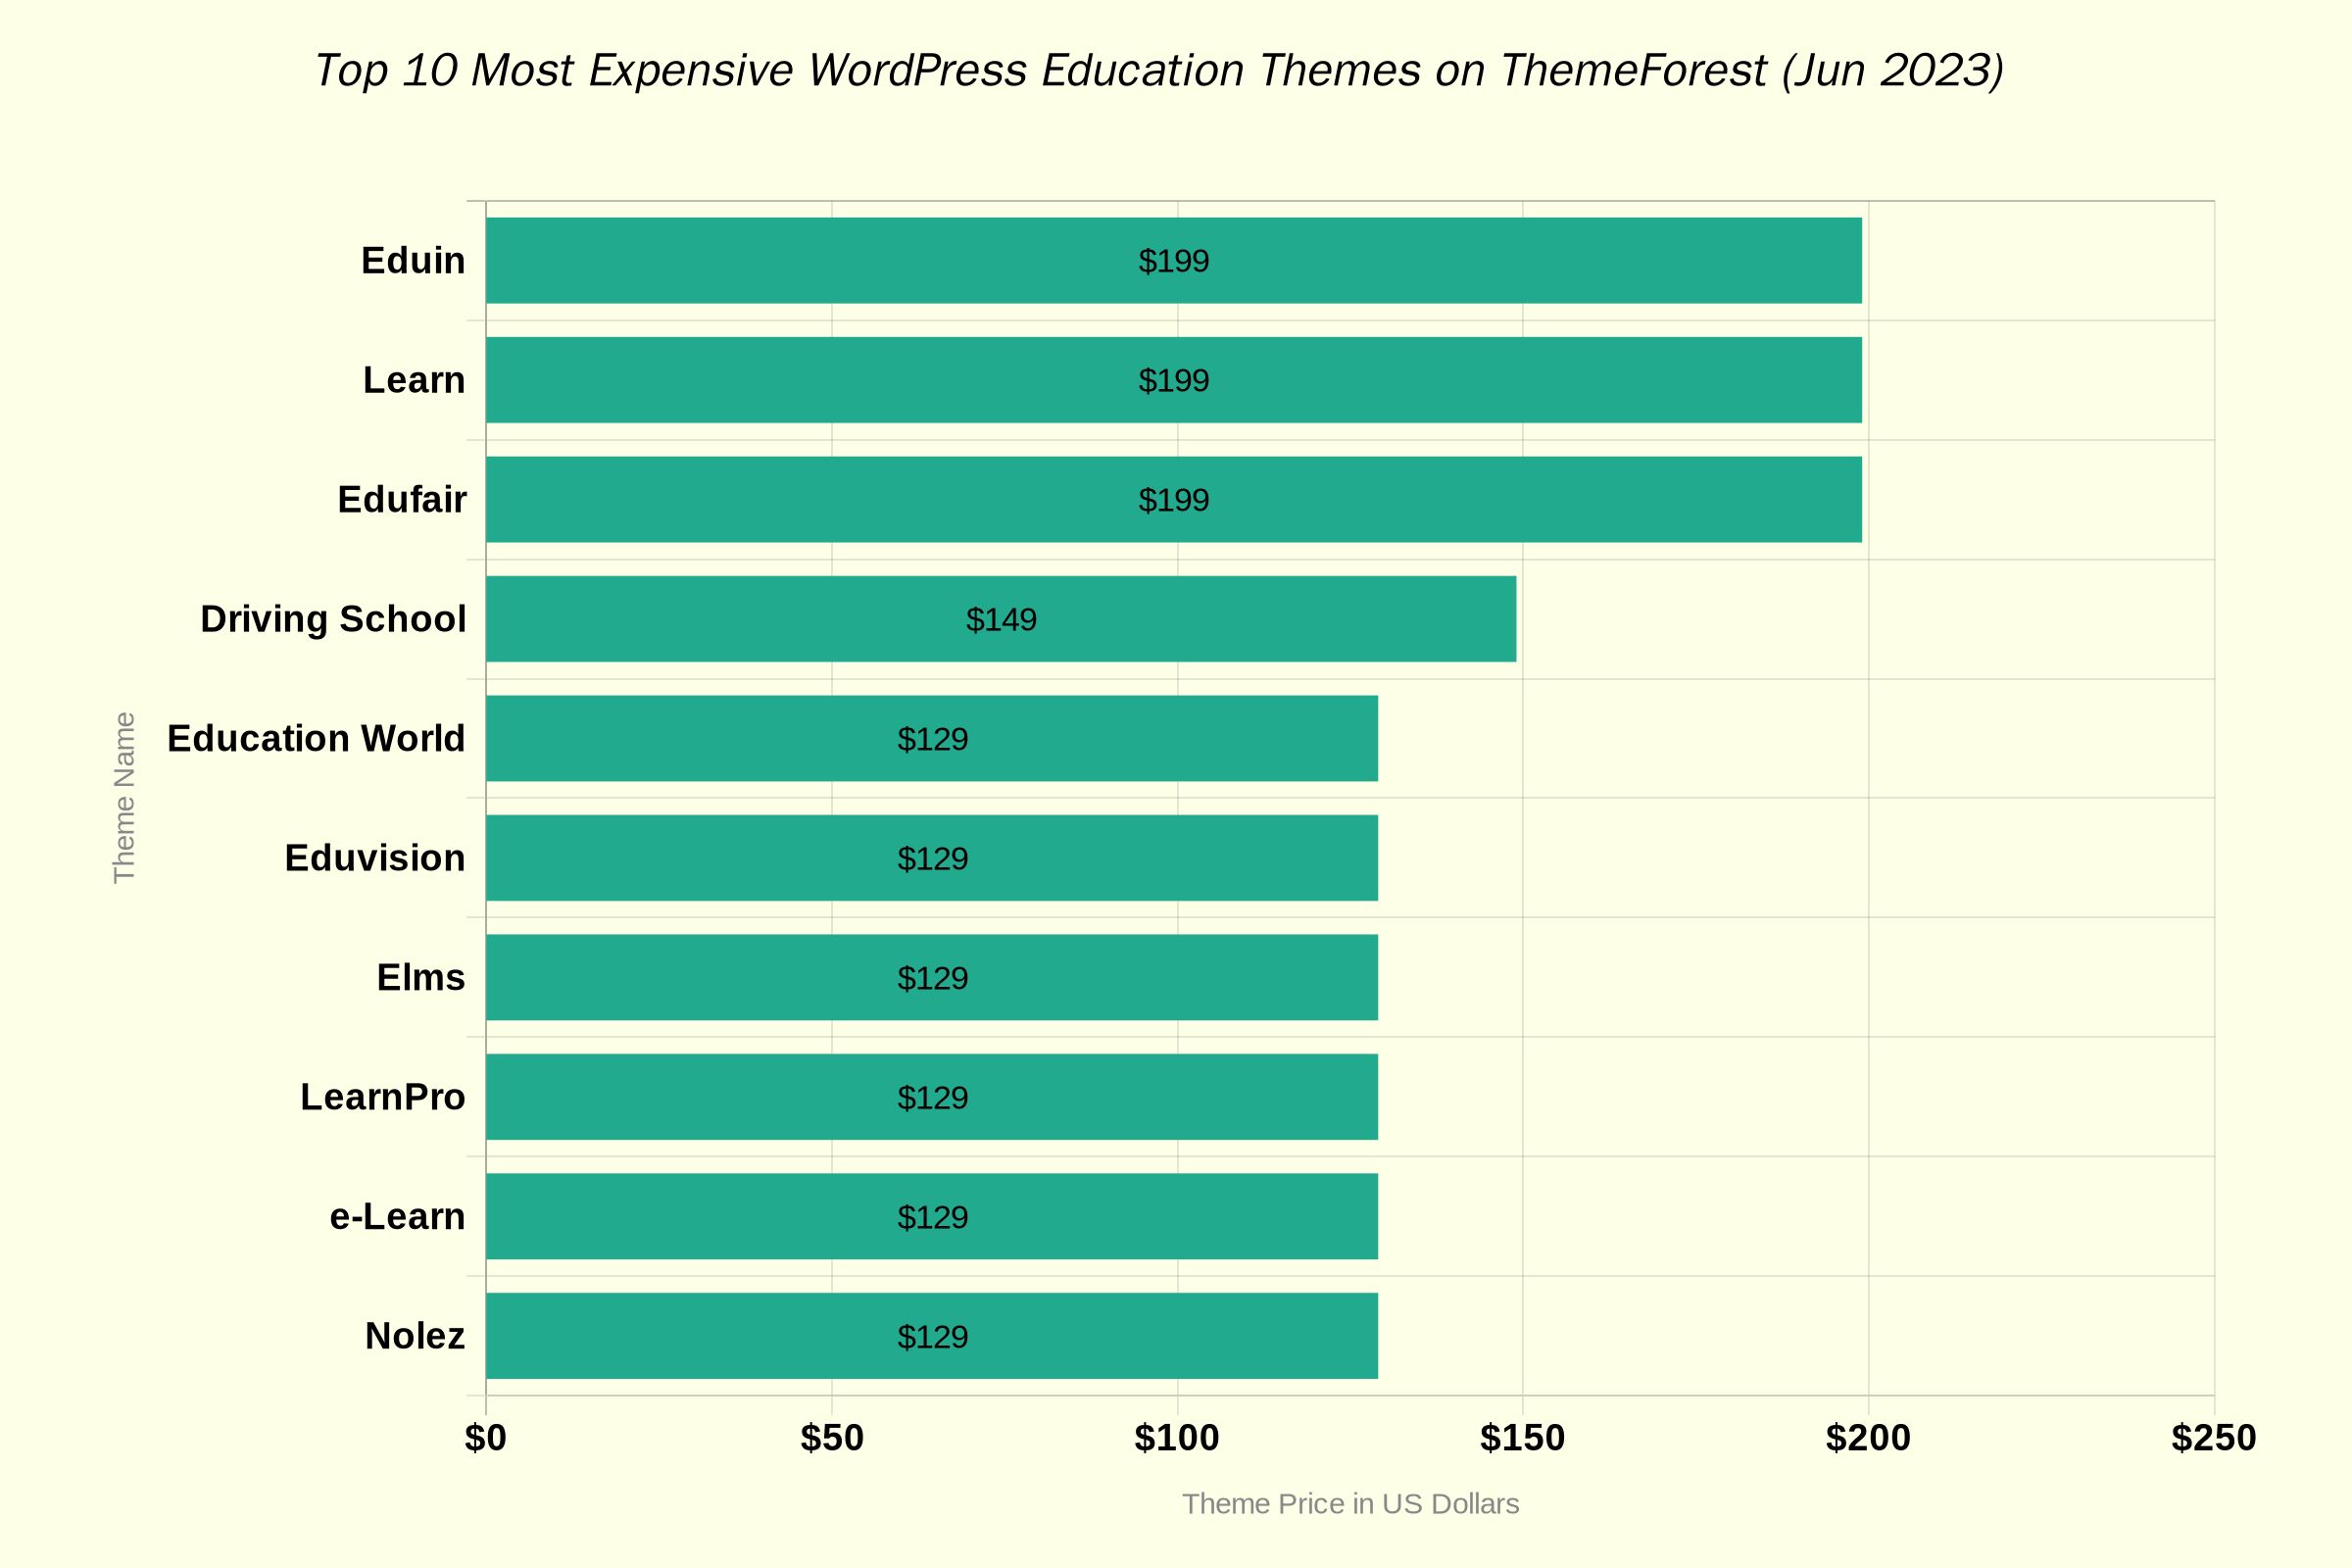 Most expensive WordPress education themes on ThemeForest